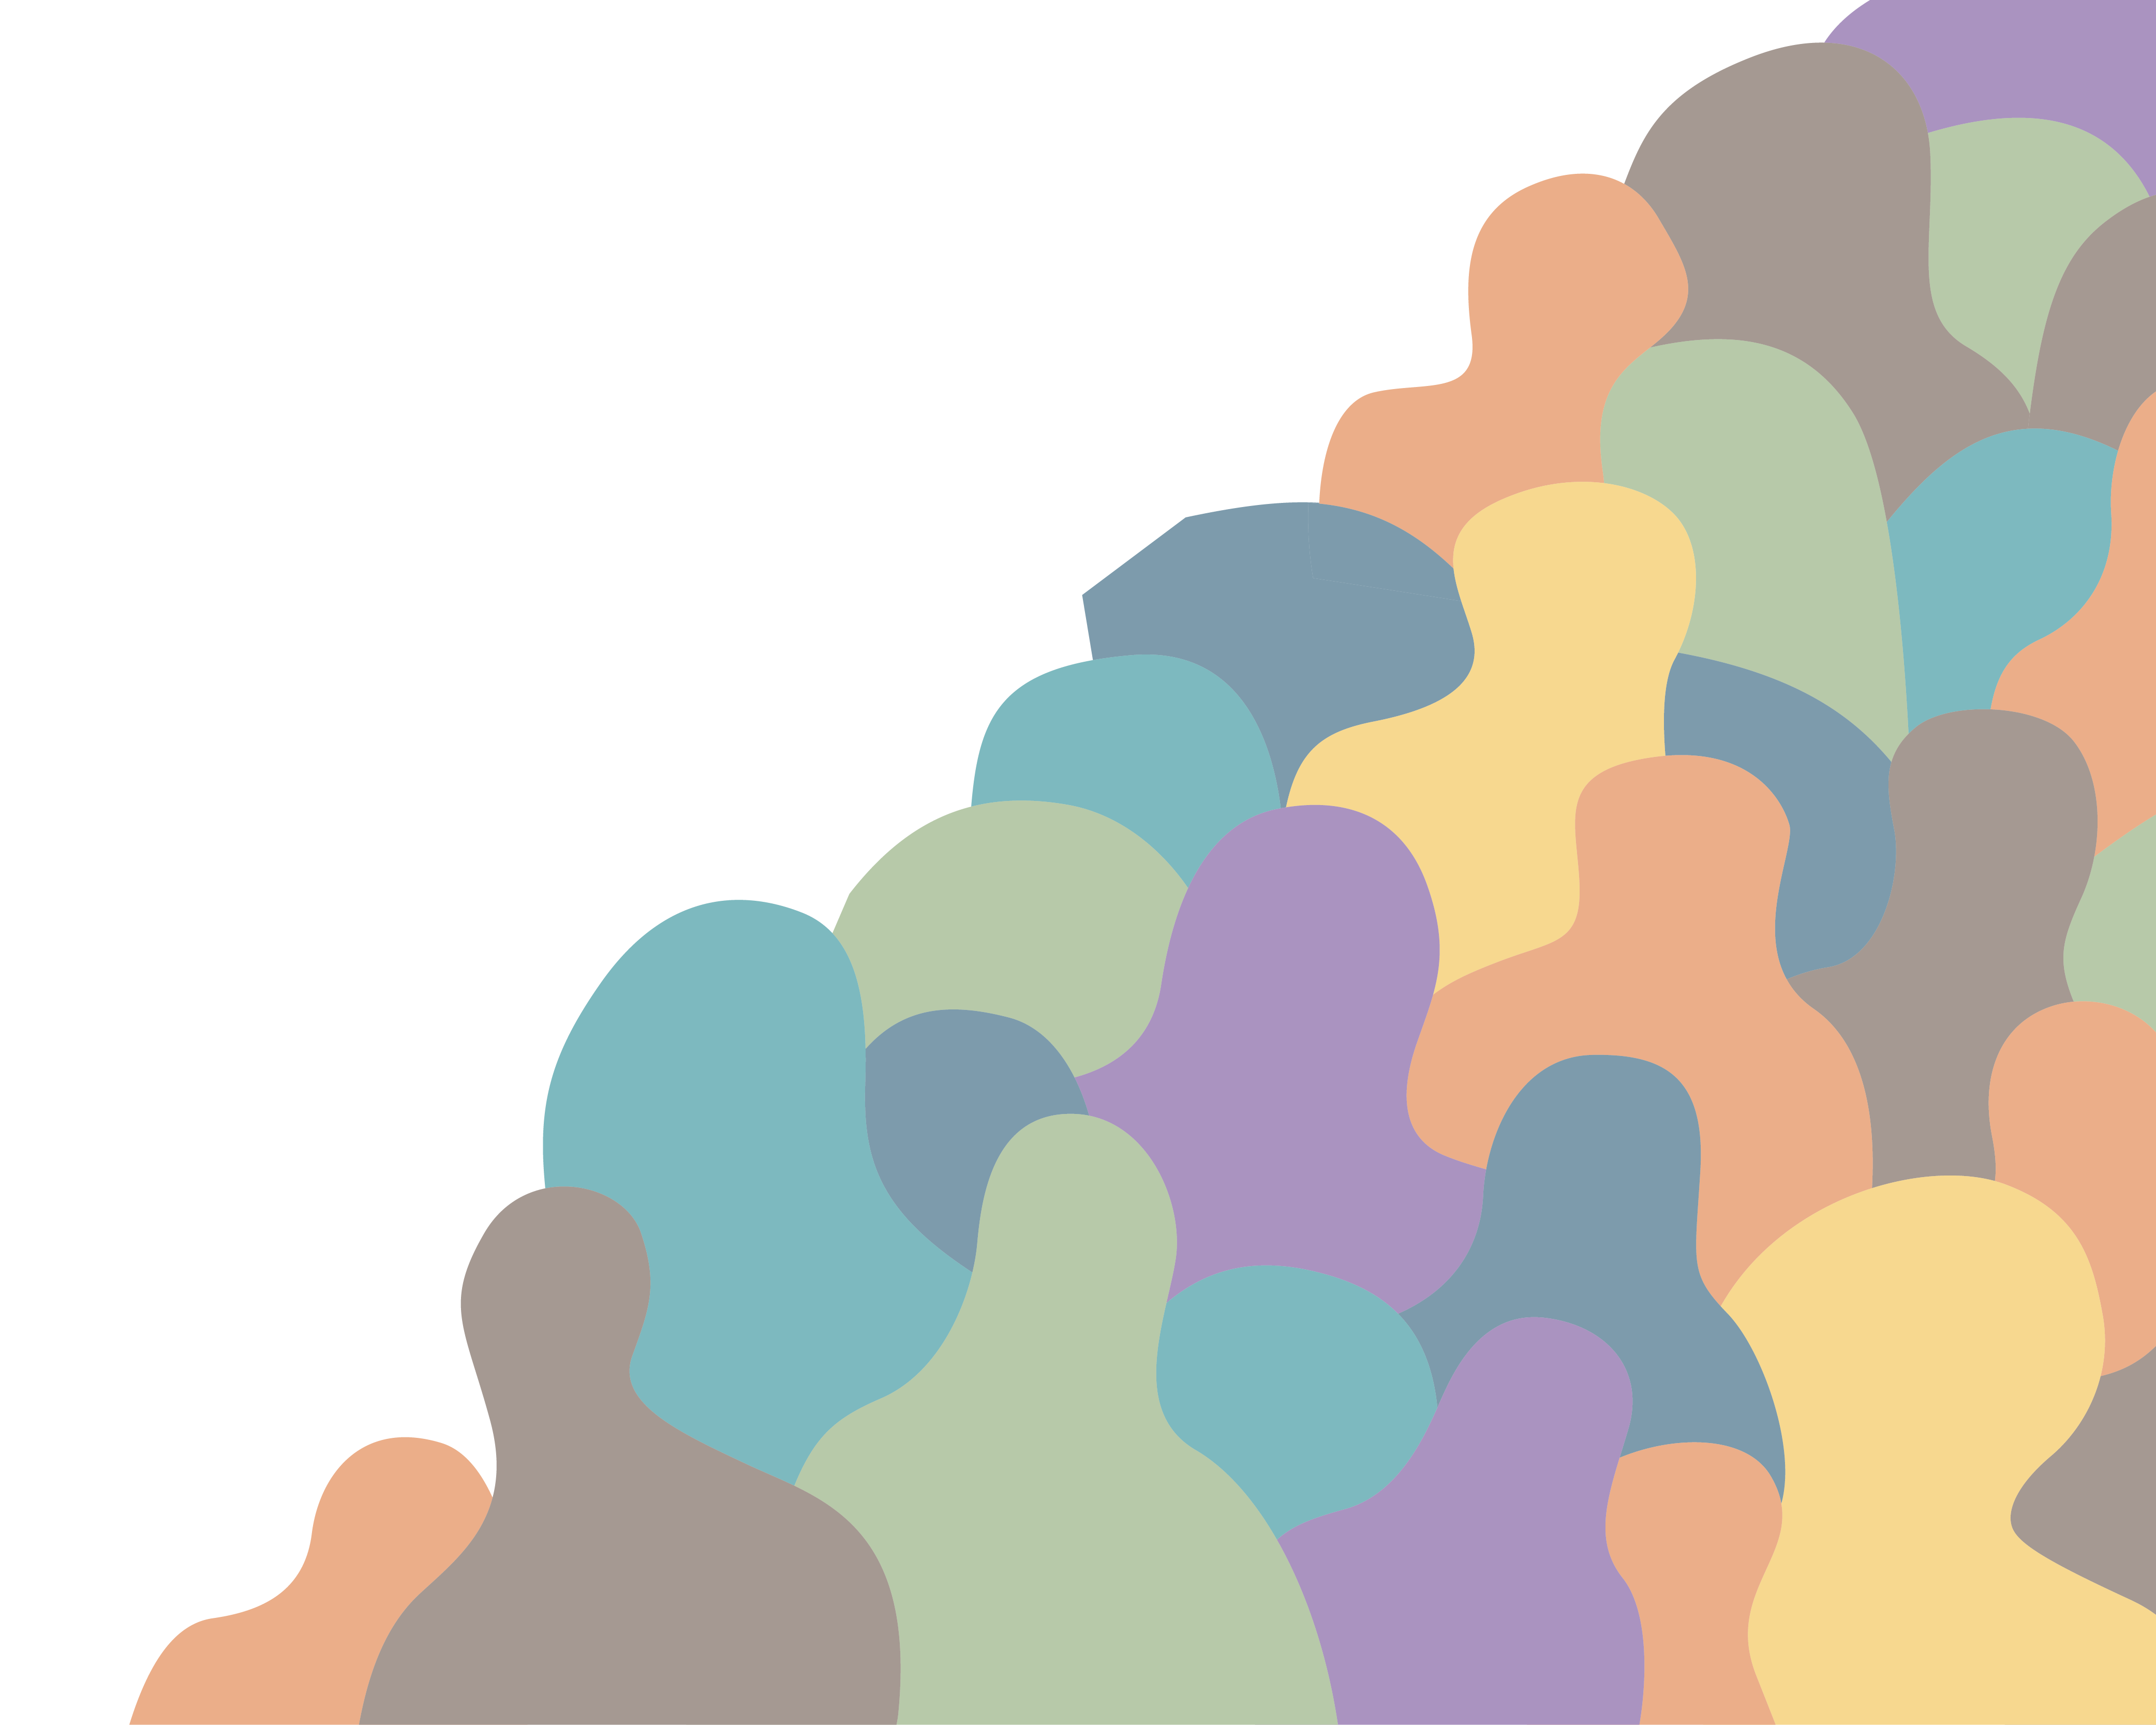 Colorful blobs resembling a crowd of diverse people